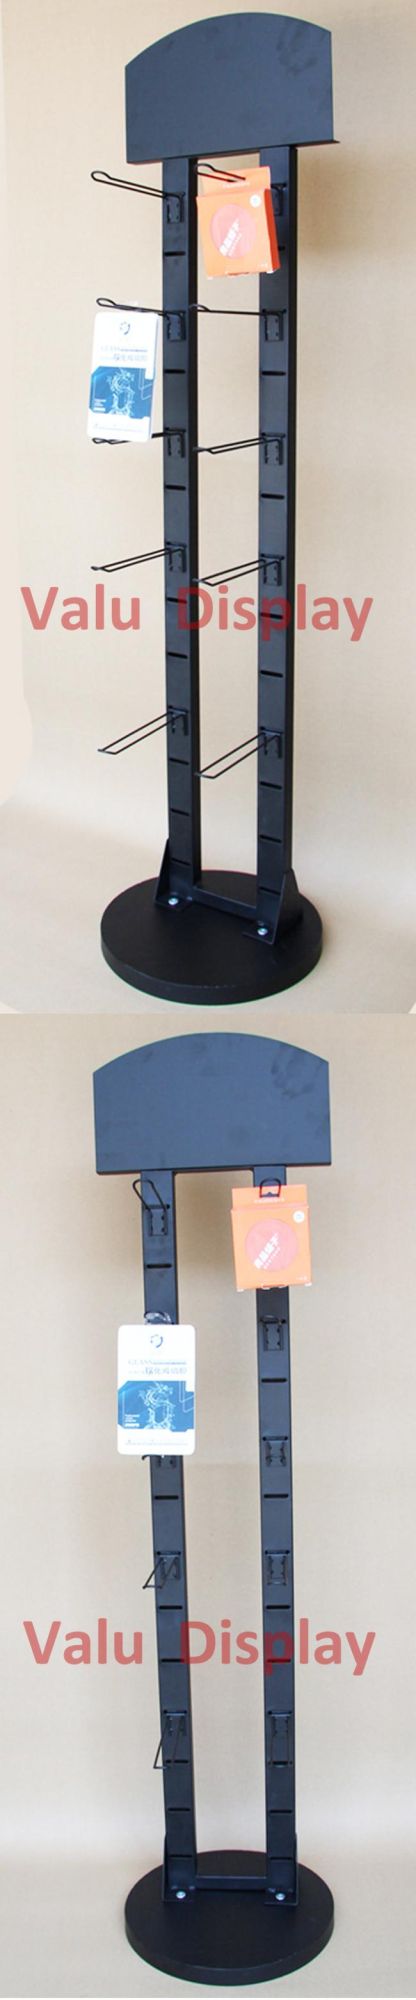 Multi-Function Rotating Metal Display Rack with Hook for Hanging Shoes/ Slippers/Greeting Cards.